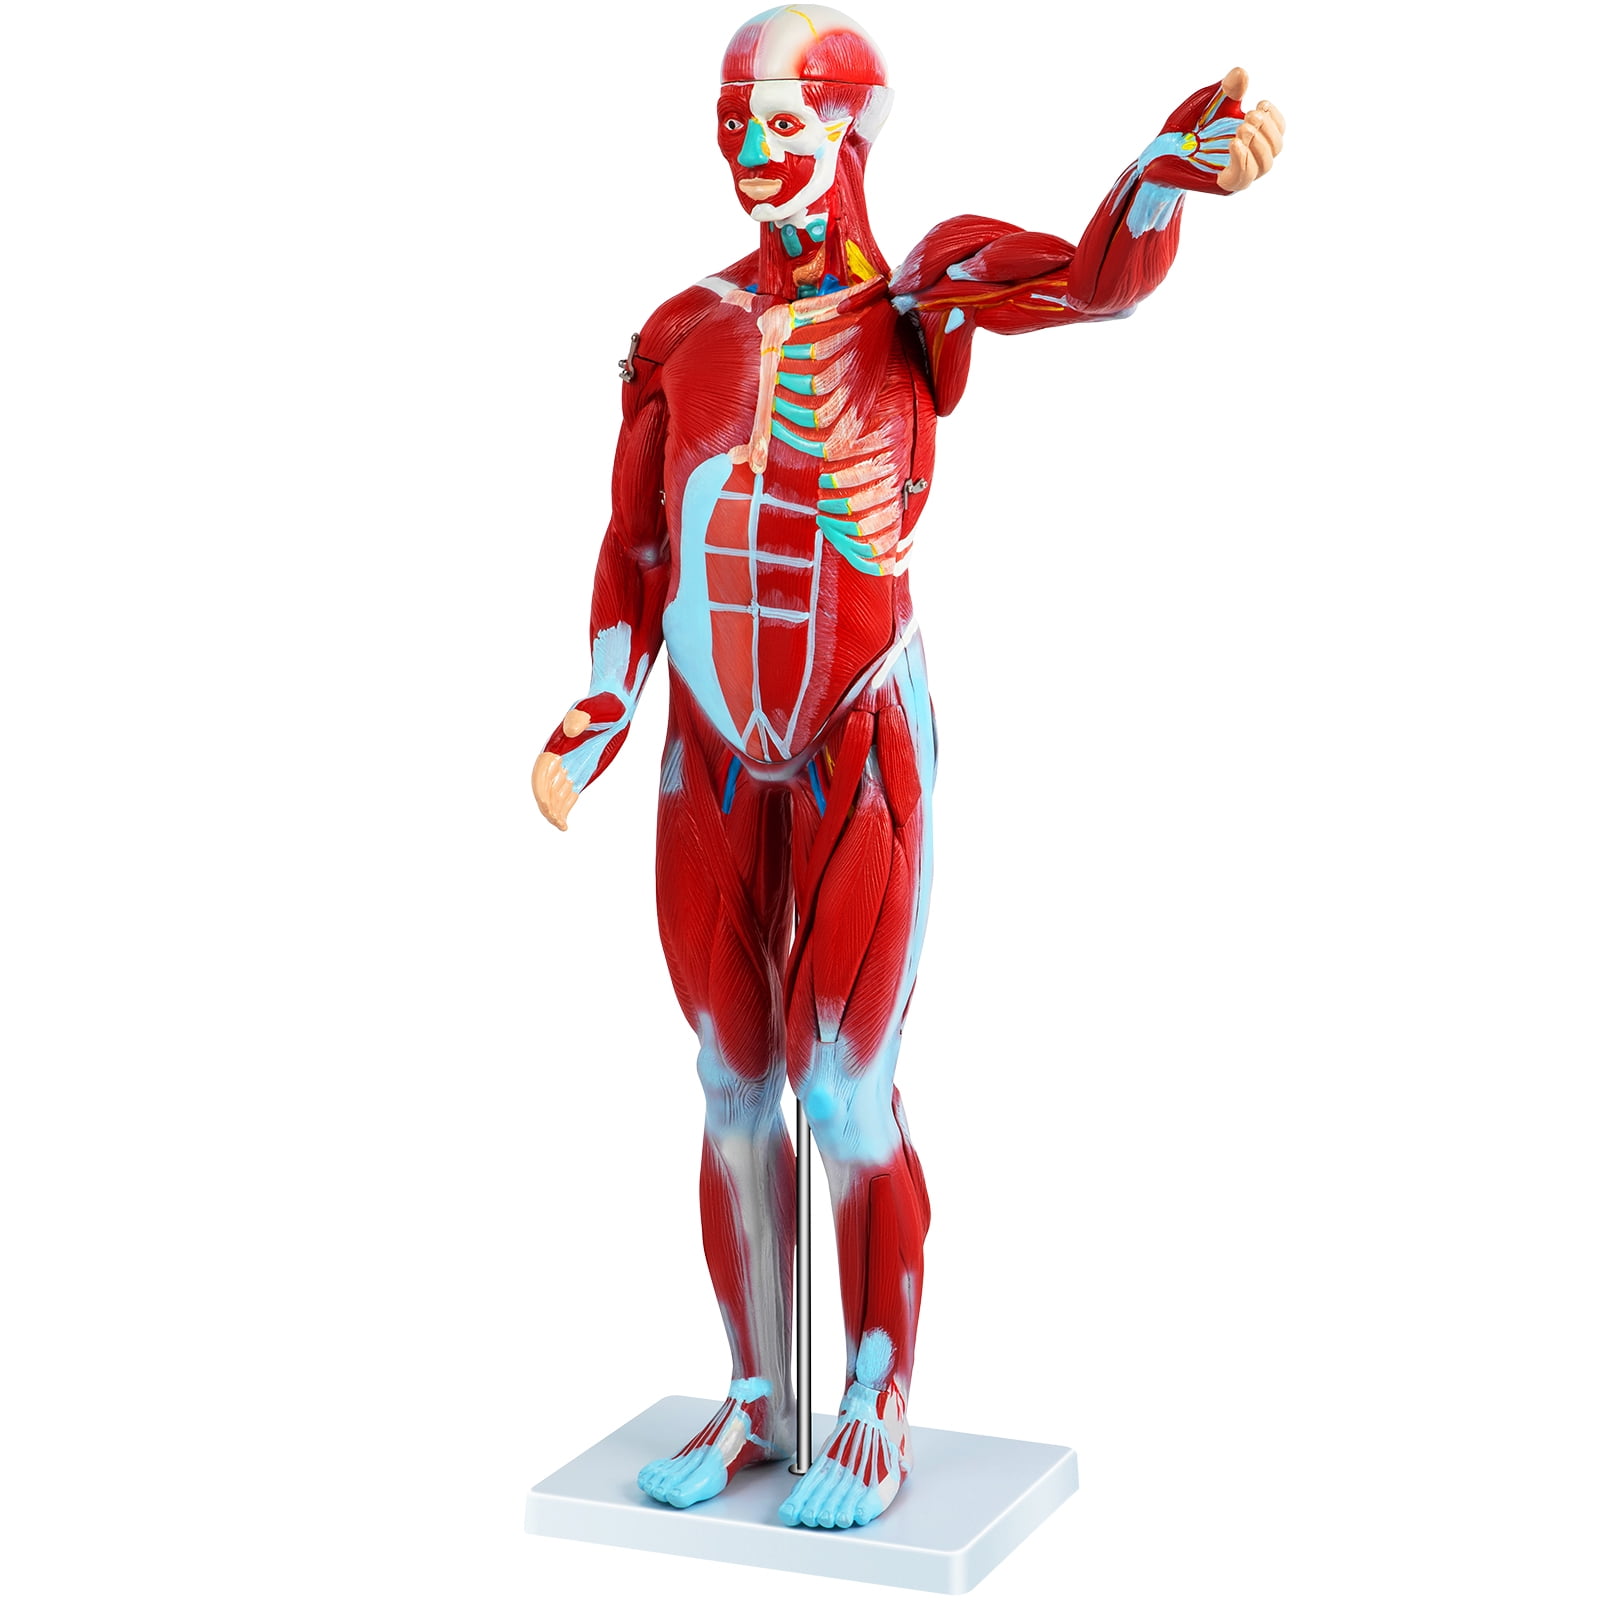 VEVOR Human Muscular Figure, 27 Parts Muscular Anatomy Model, Half Life Size Human Muscle and Organ Model, Muscle Model with Stand, Muscular System Model with Detachable Organs, for Medical Learning image